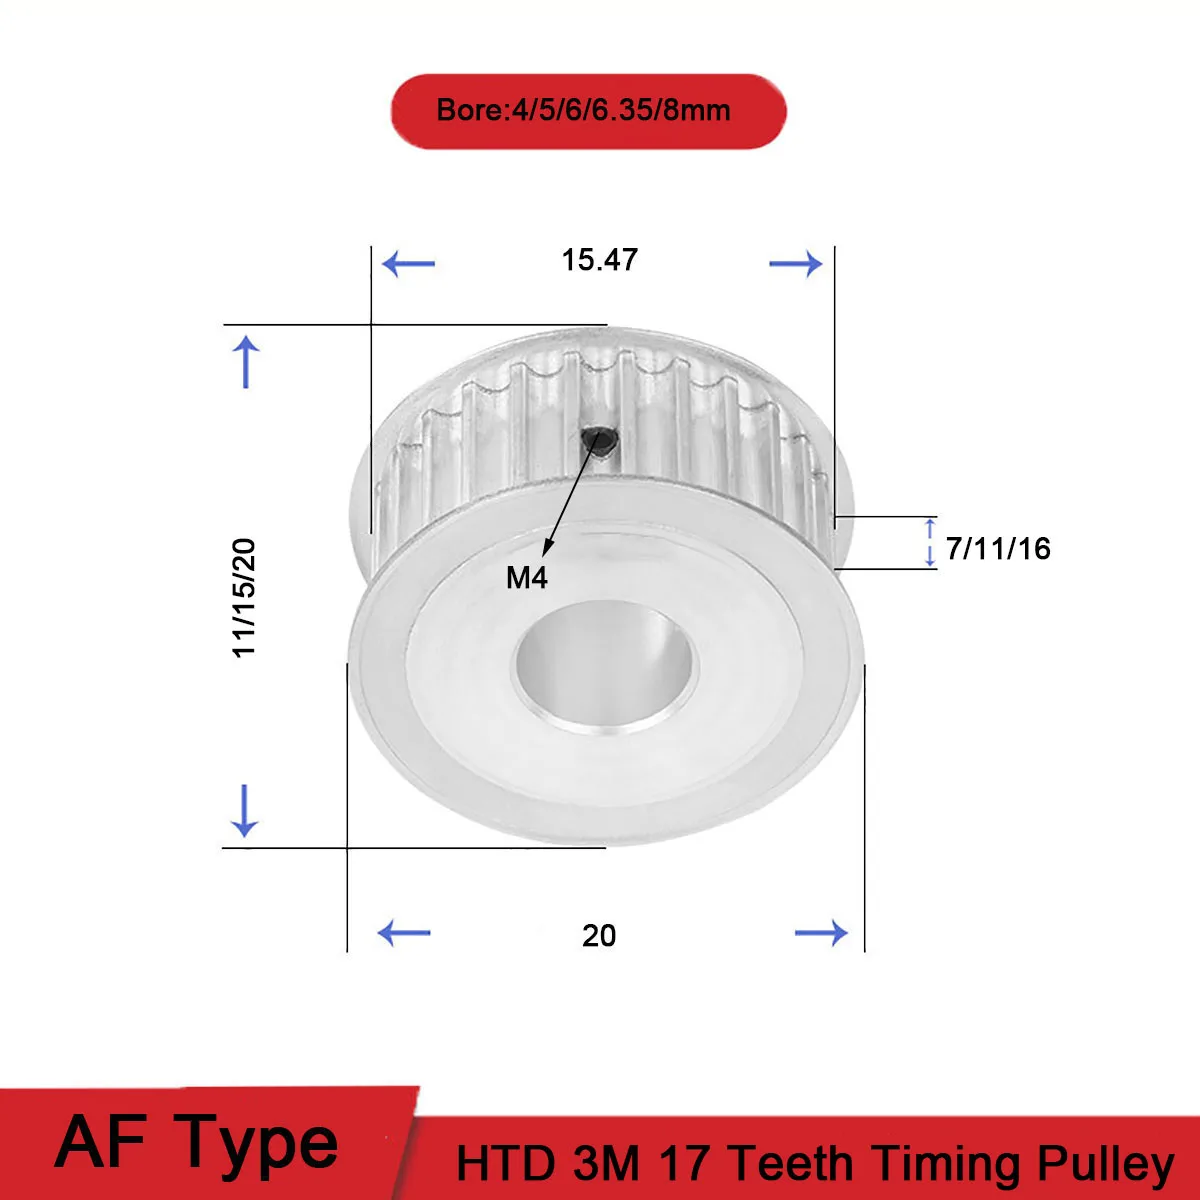 

HTD 3M 17T Timing Pulley Bore 4/5/6/6.35/8mm Gear Pulley 3mm Pitch Teeth Width 7/11/16mm Aluminum Synchronous Timing Belt Pulley